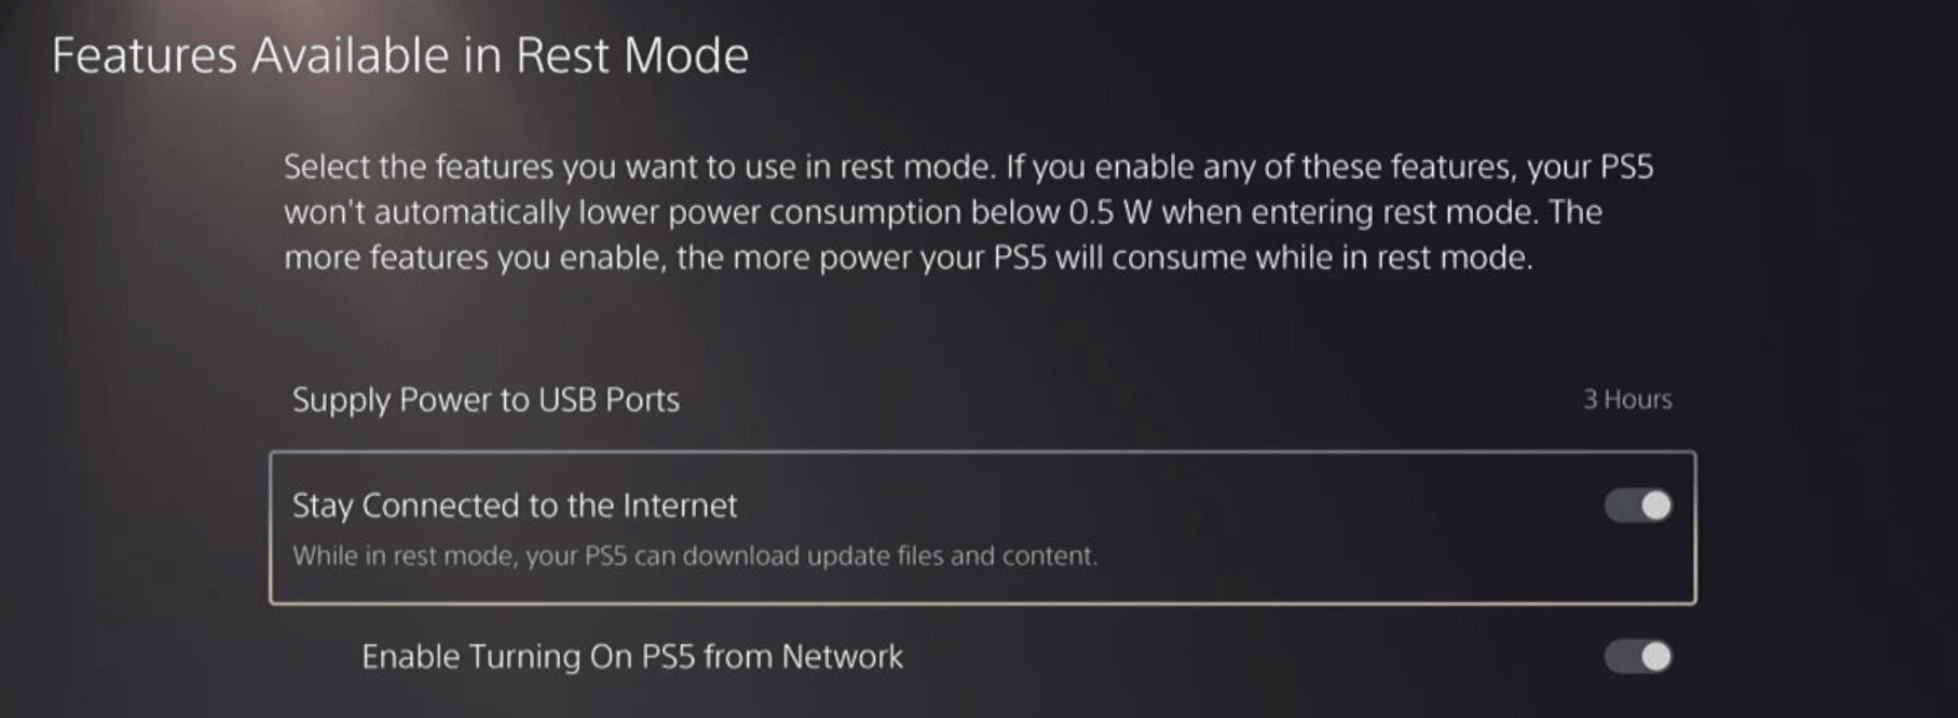 Stay Connected to the Internet is toggled in PS5 rest mode settings menu to enable automatic updates of Hogwarts Legacy